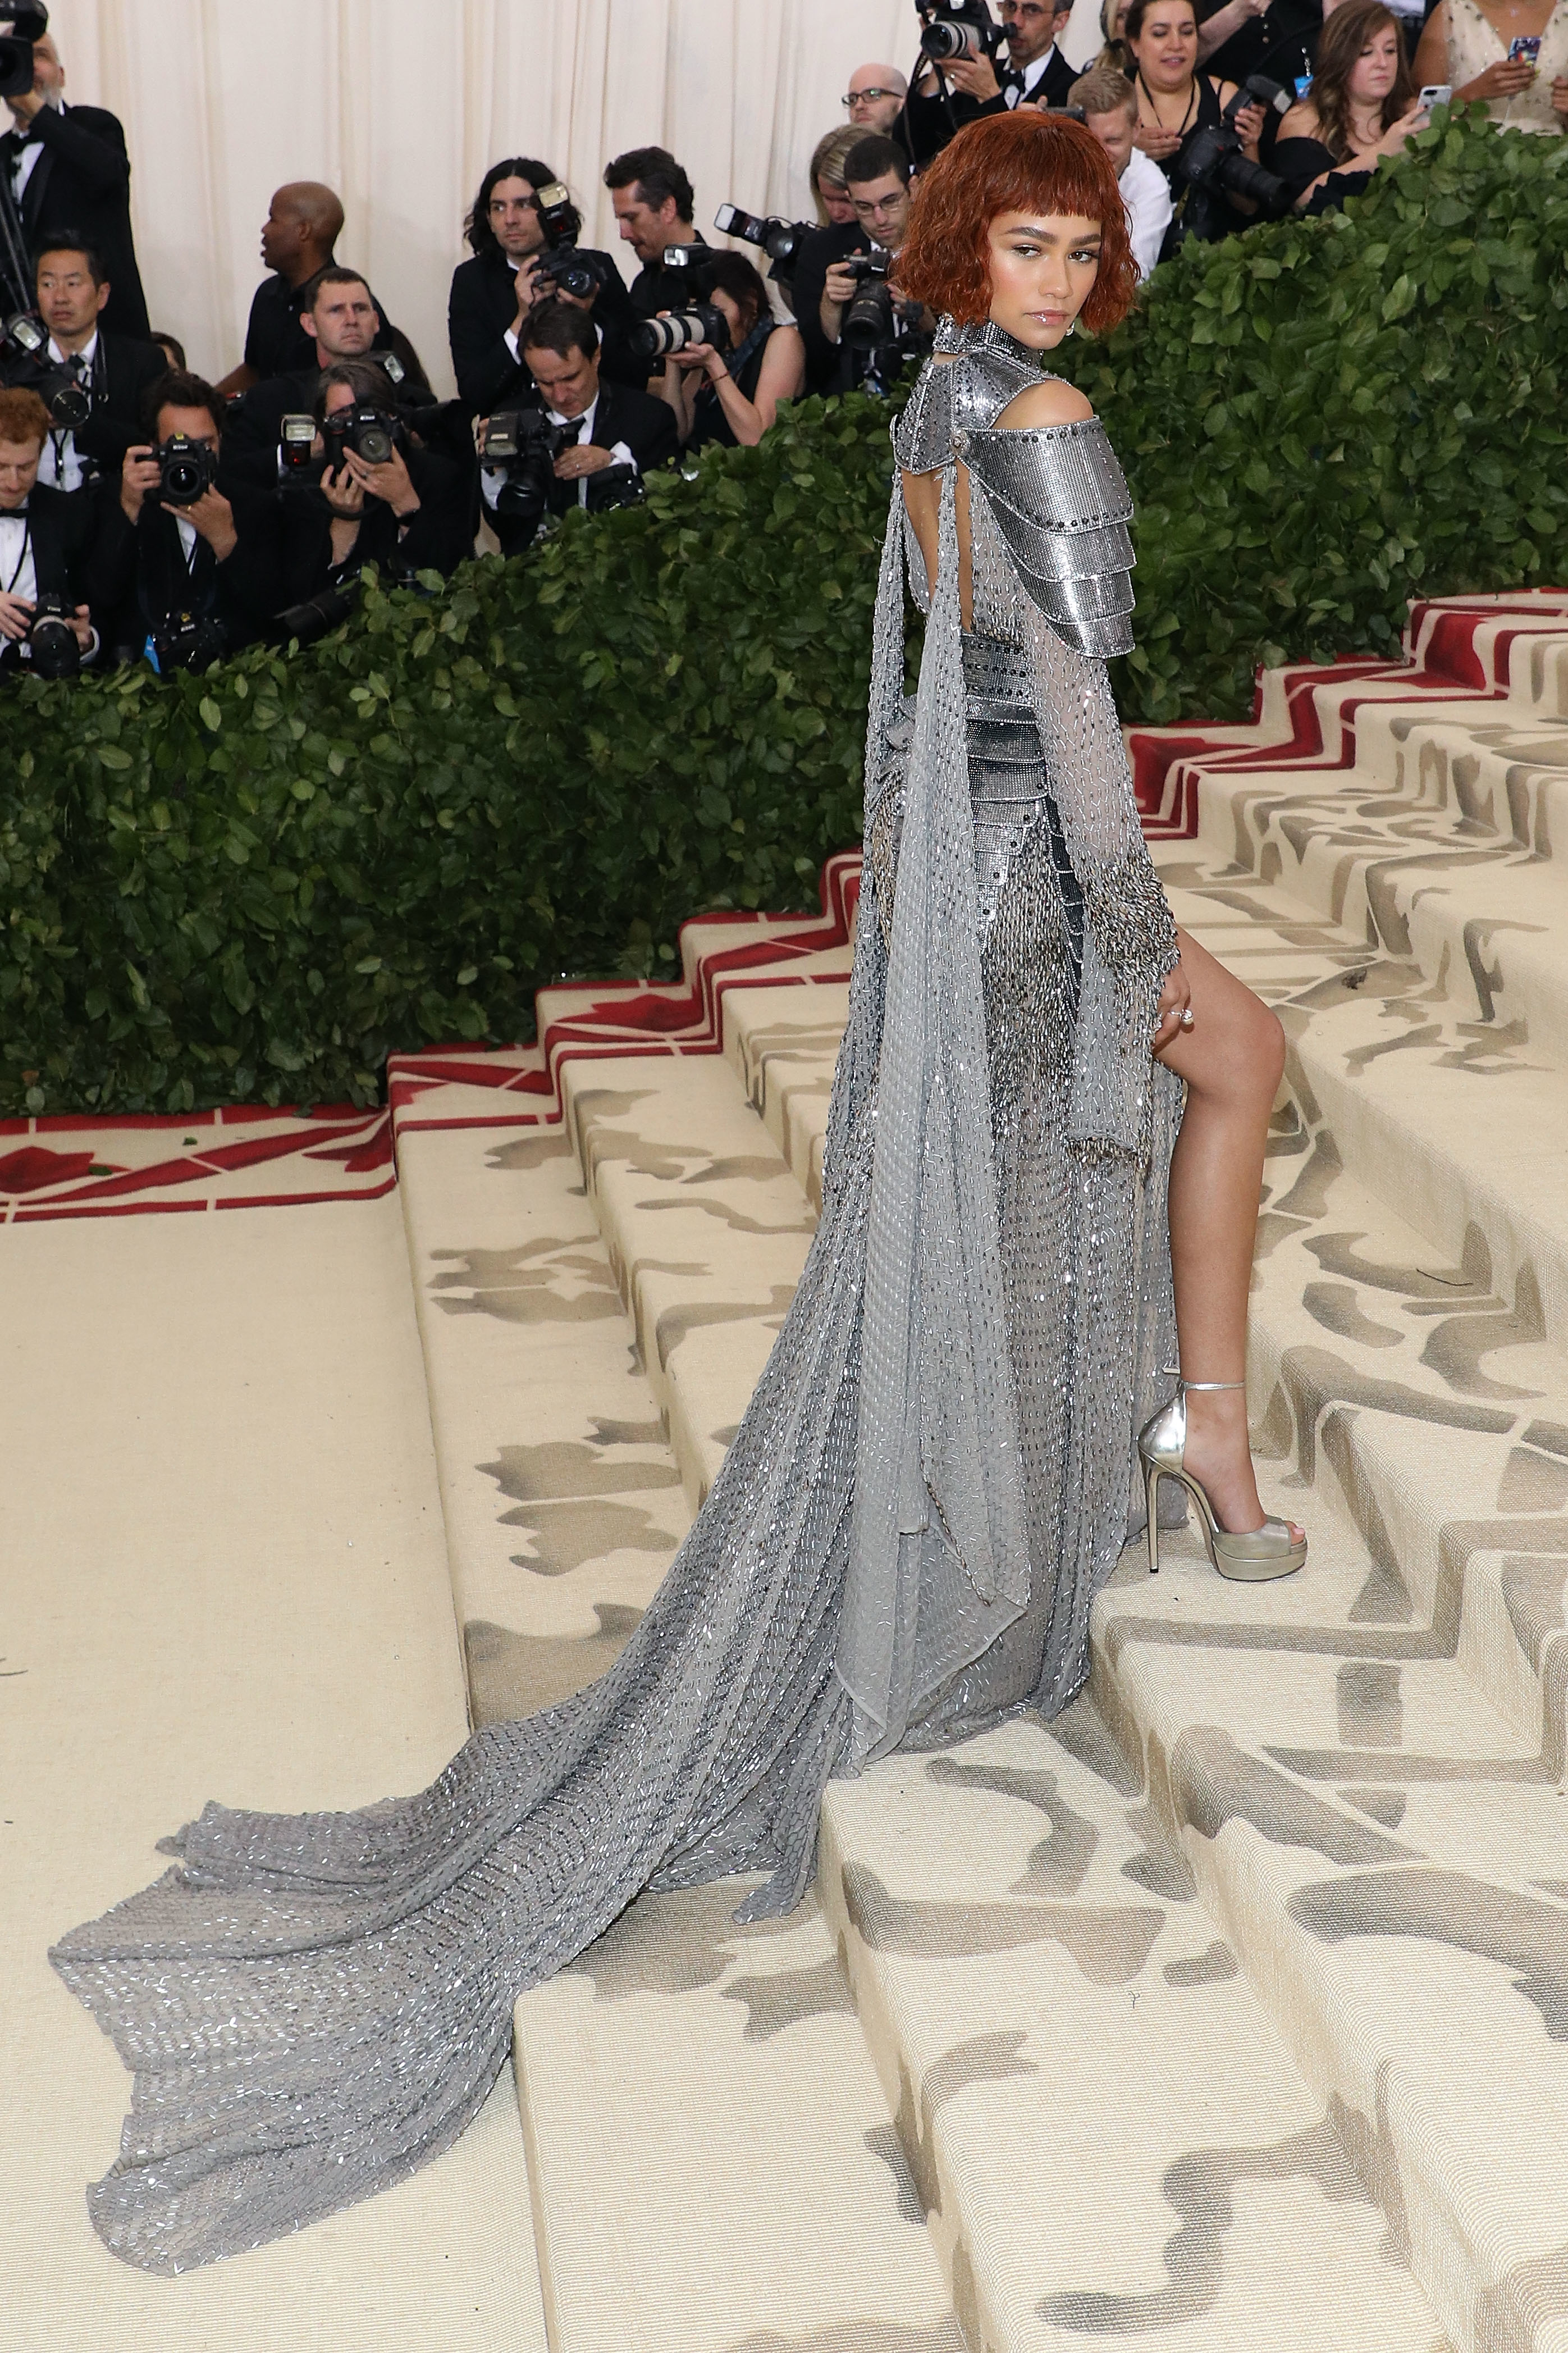 Zendaya in a metallic gown with a long train and arm armor posing on stairs at the Met Gala